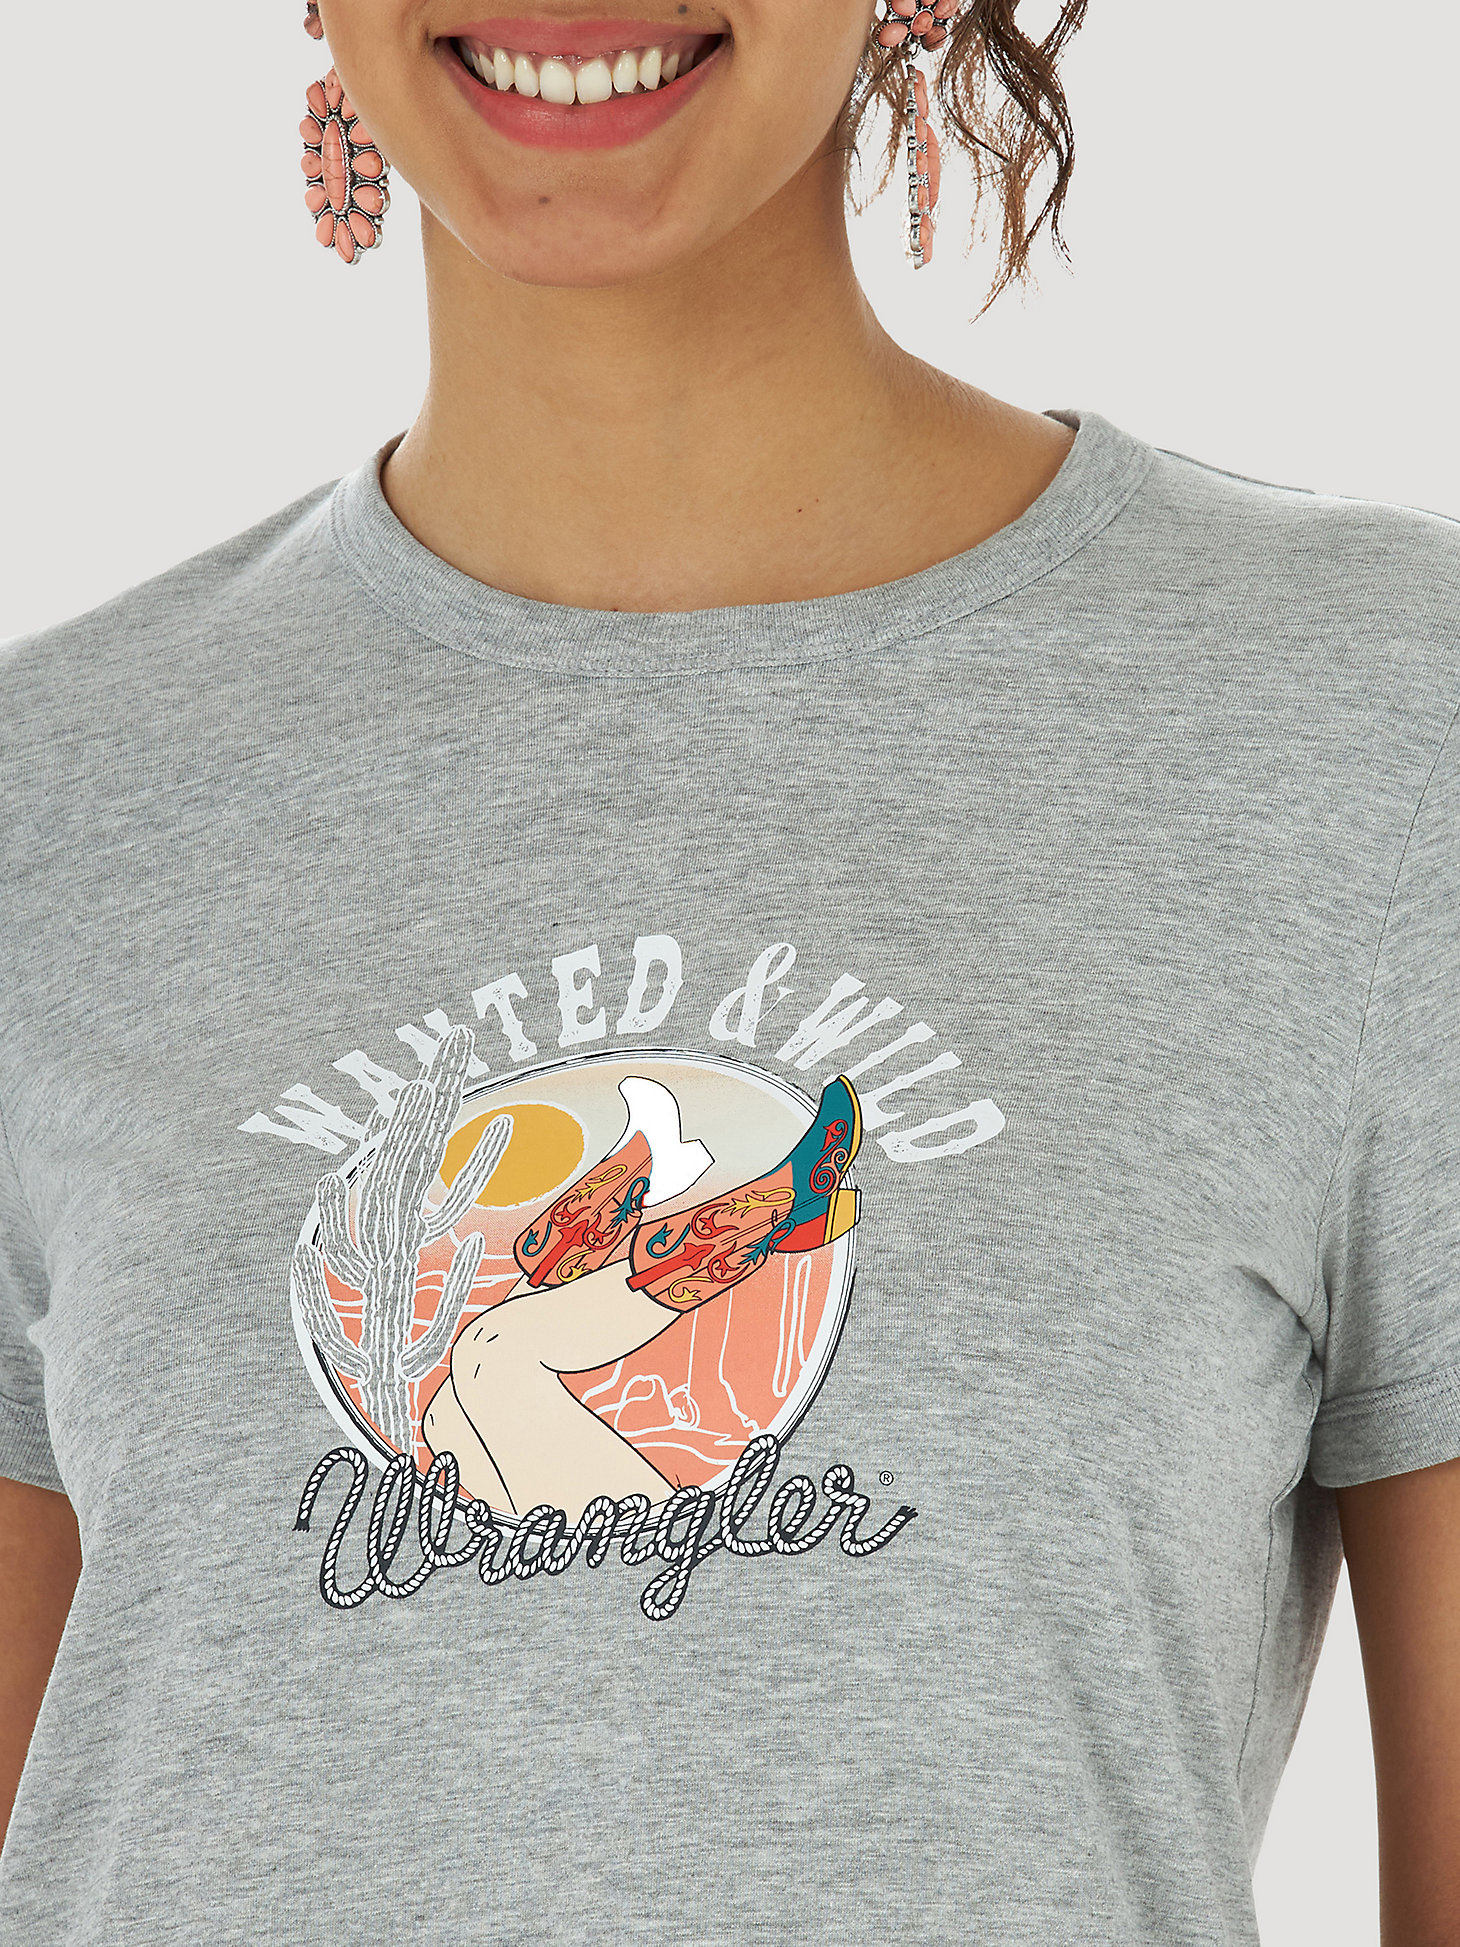 Women's Wanted And Wild Ringer Tee in Grey alternative view 2